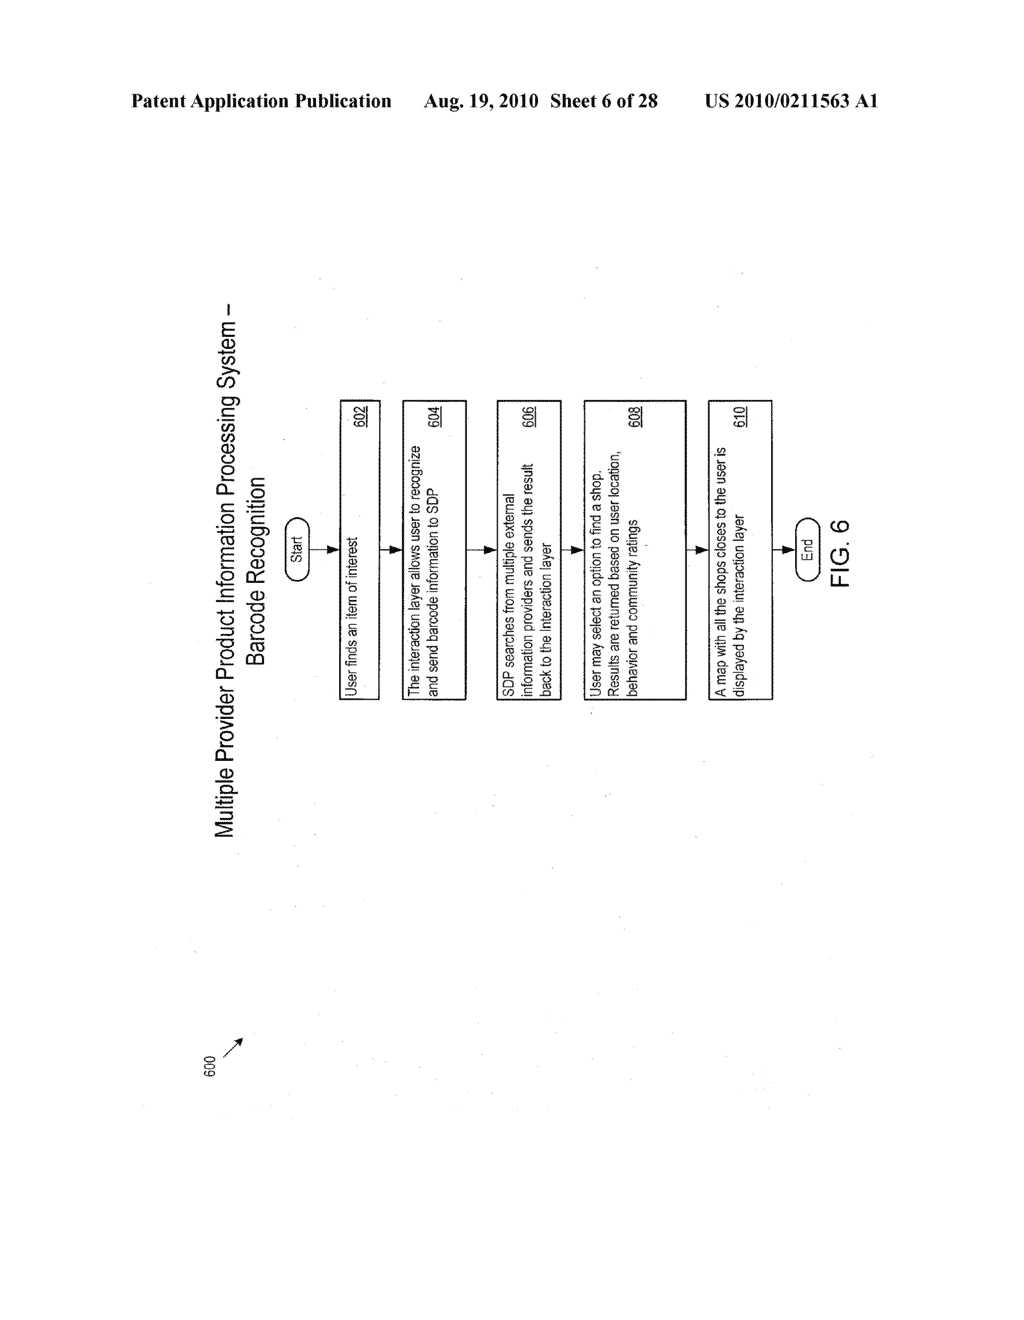 Cross Community Invitation and Multiple Provider Product Information Processing System - diagram, schematic, and image 07